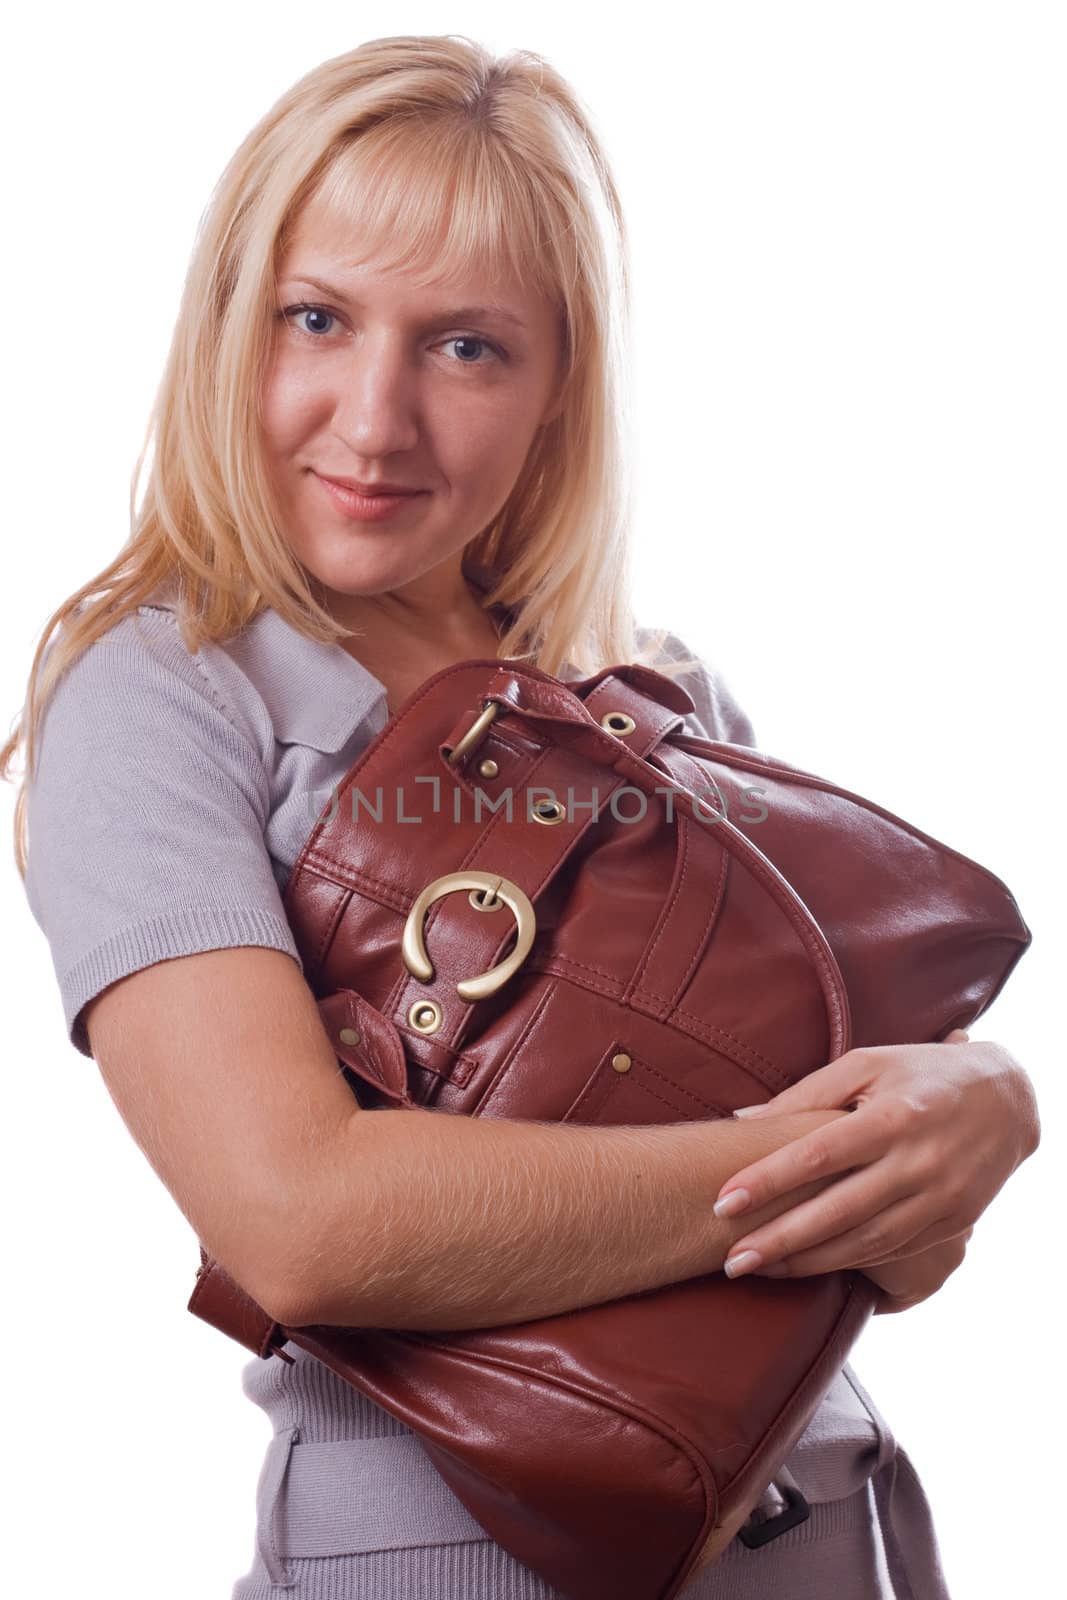 Blonde woman with handbag. Isolated on white. #1